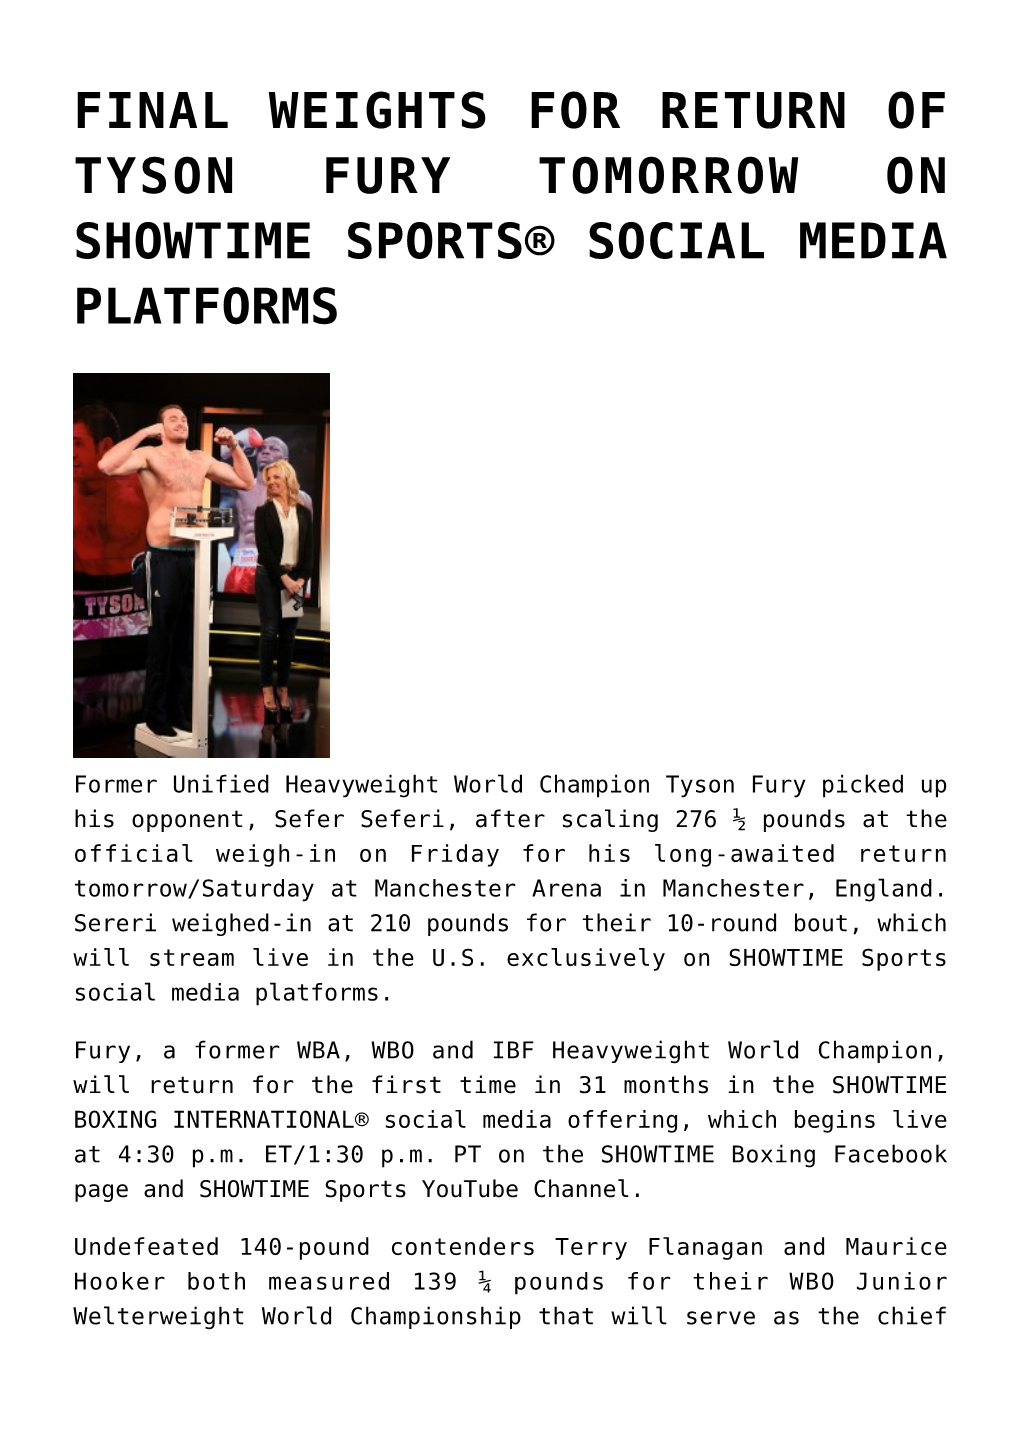 Final Weights for Return of Tyson Fury Tomorrow on Showtime Sports® Social Media Platforms